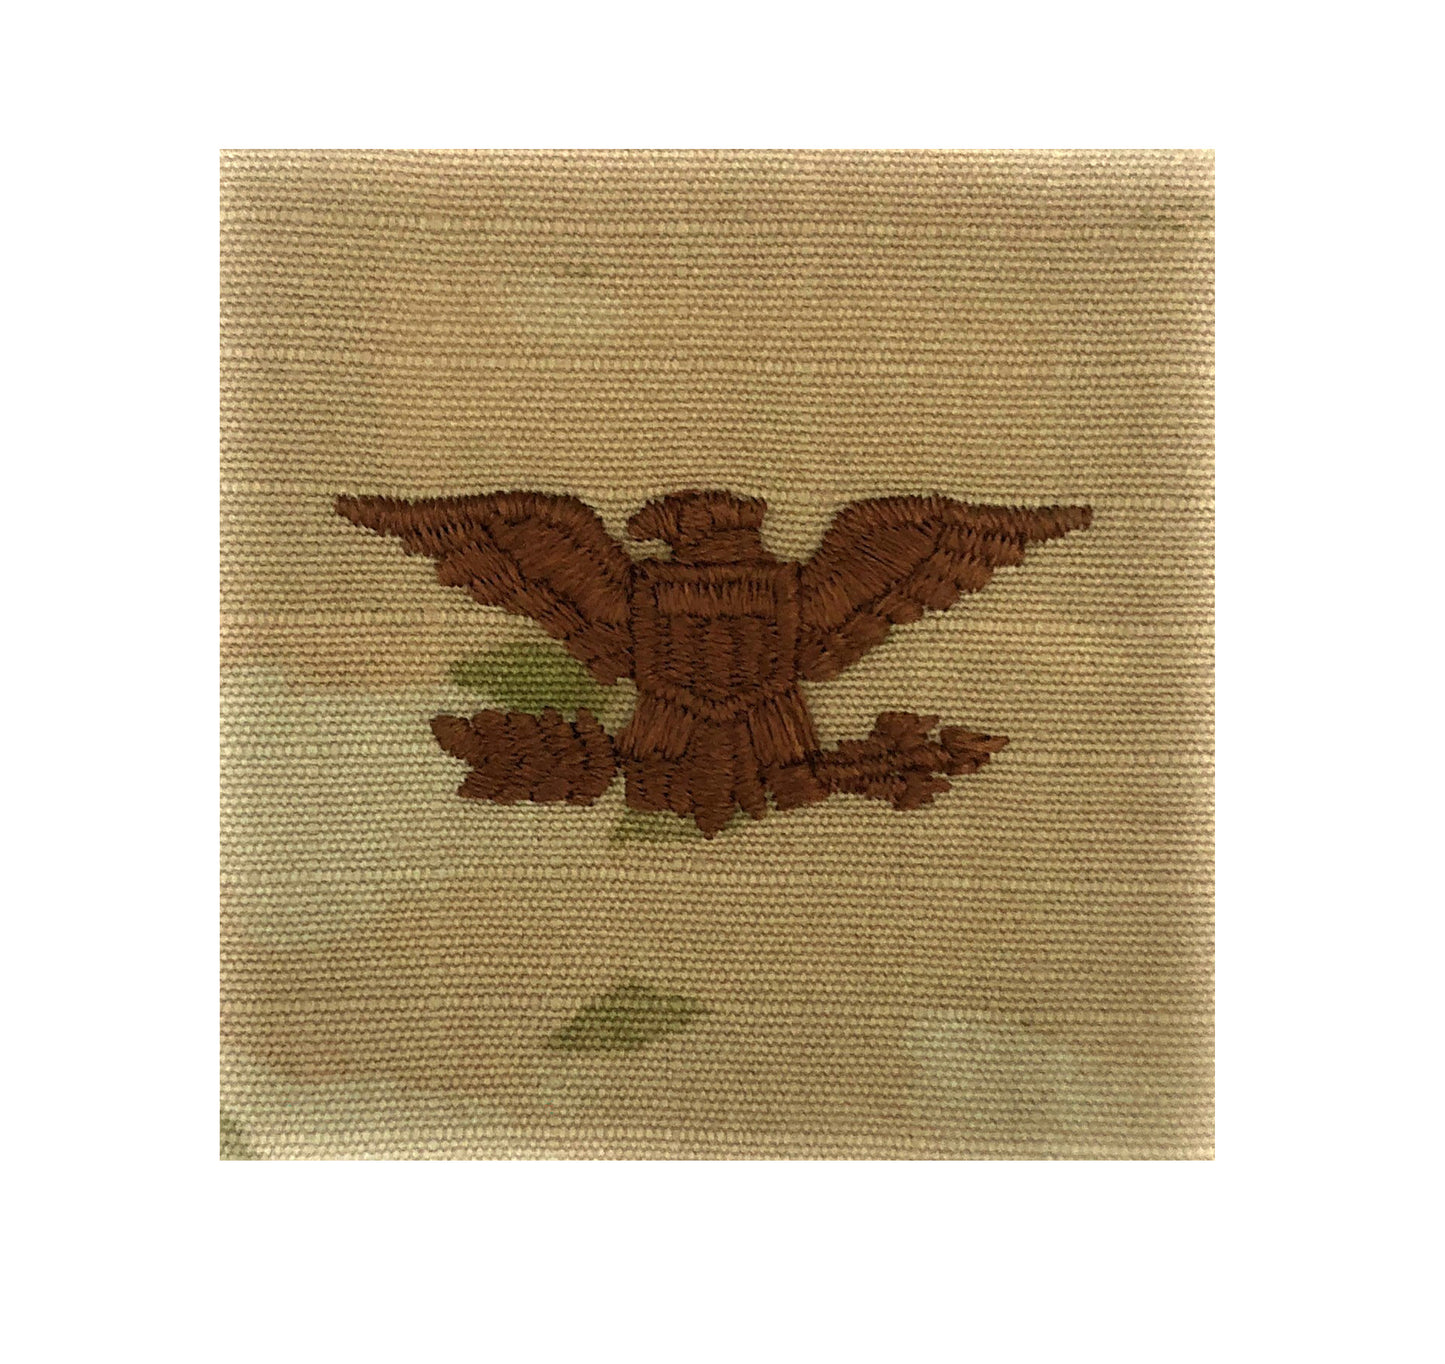 U.S. Air Force O6 Colonel OCP Spice Brown Sew-On Rank For Shirt, Jacket, Coat